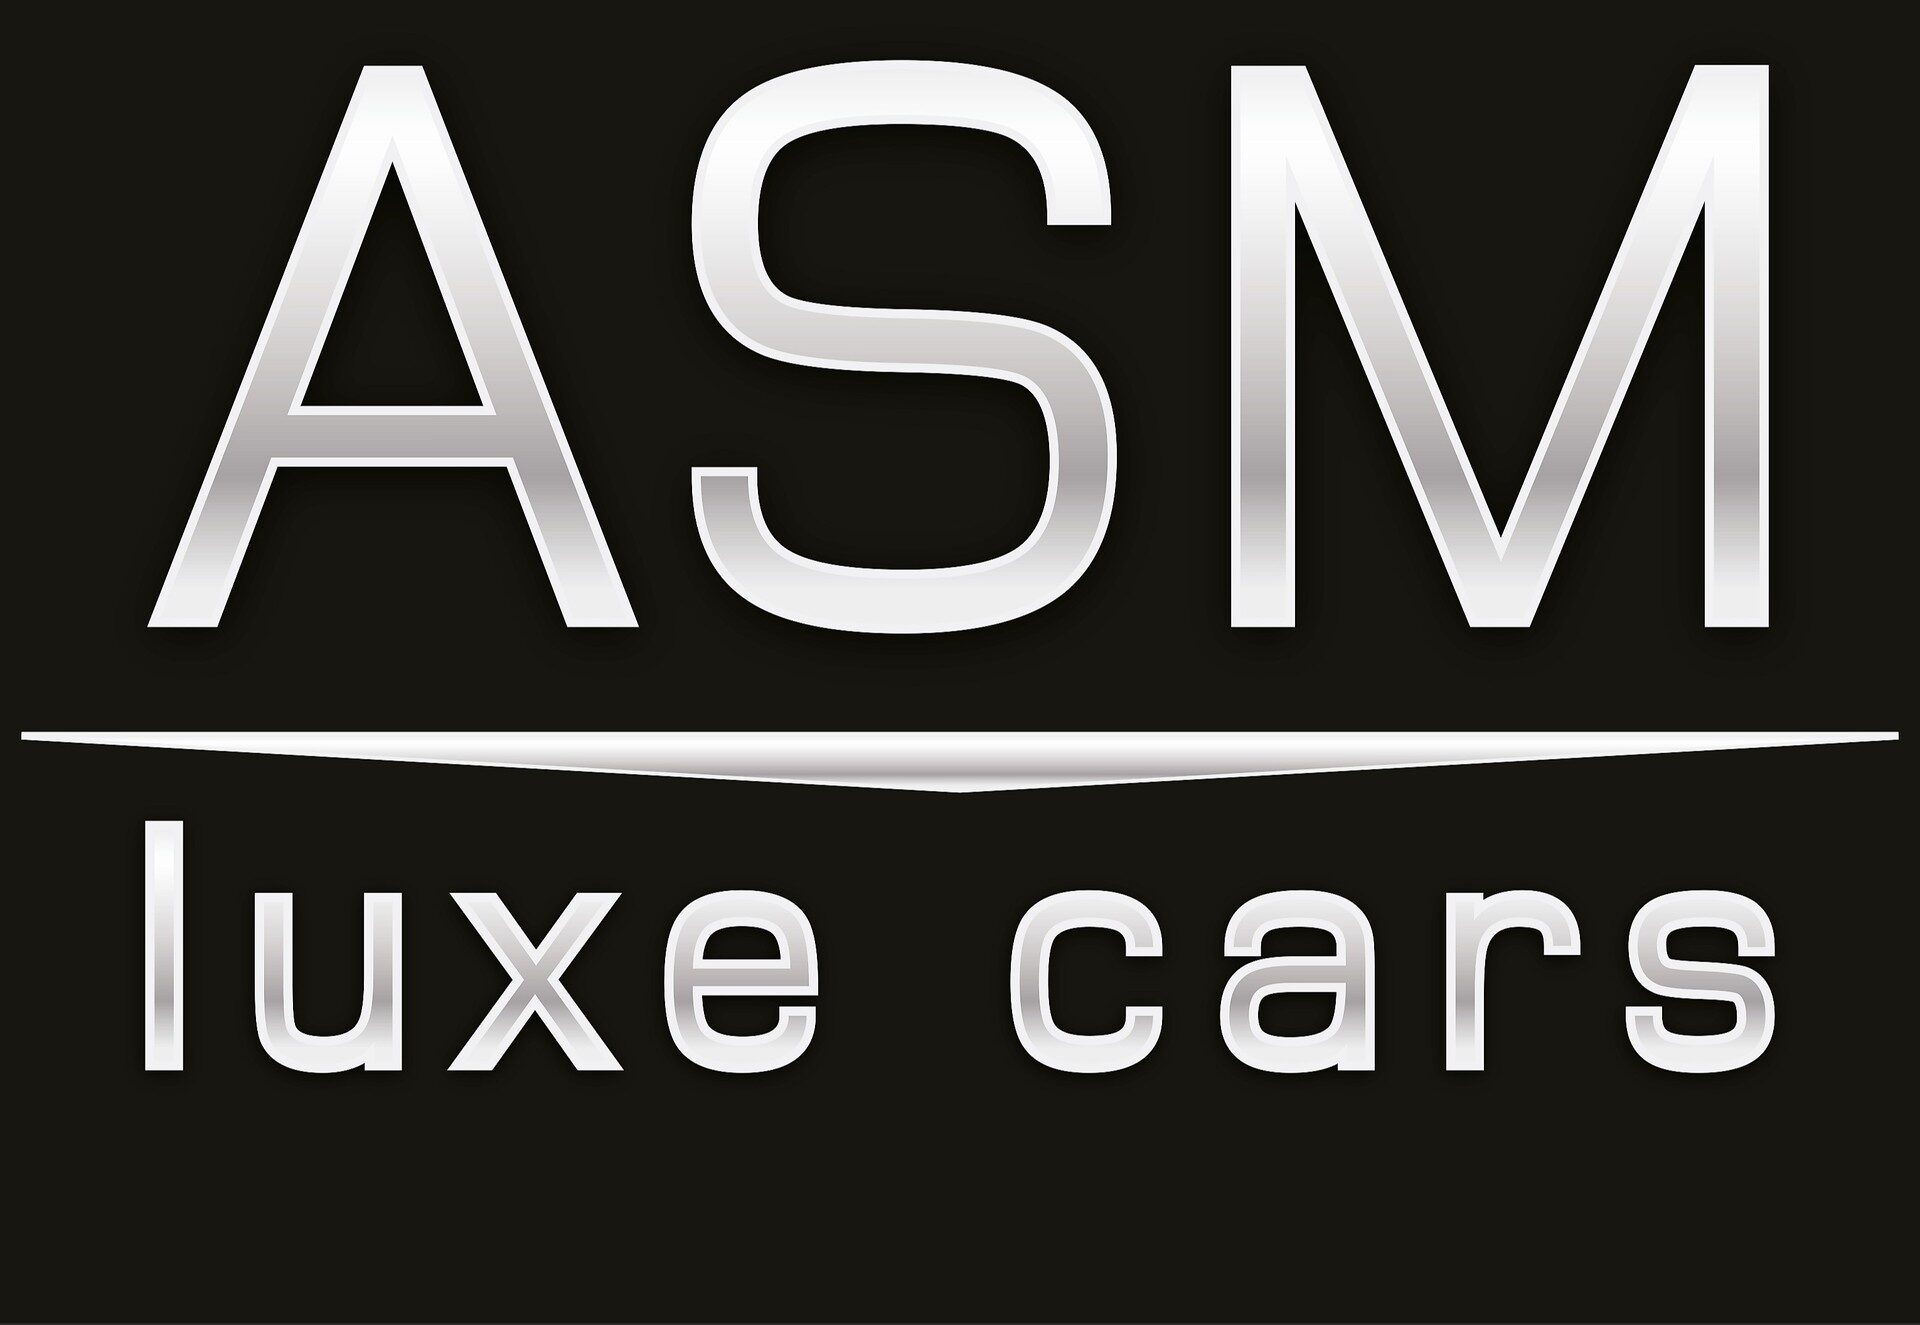 ASM LUXE CARS